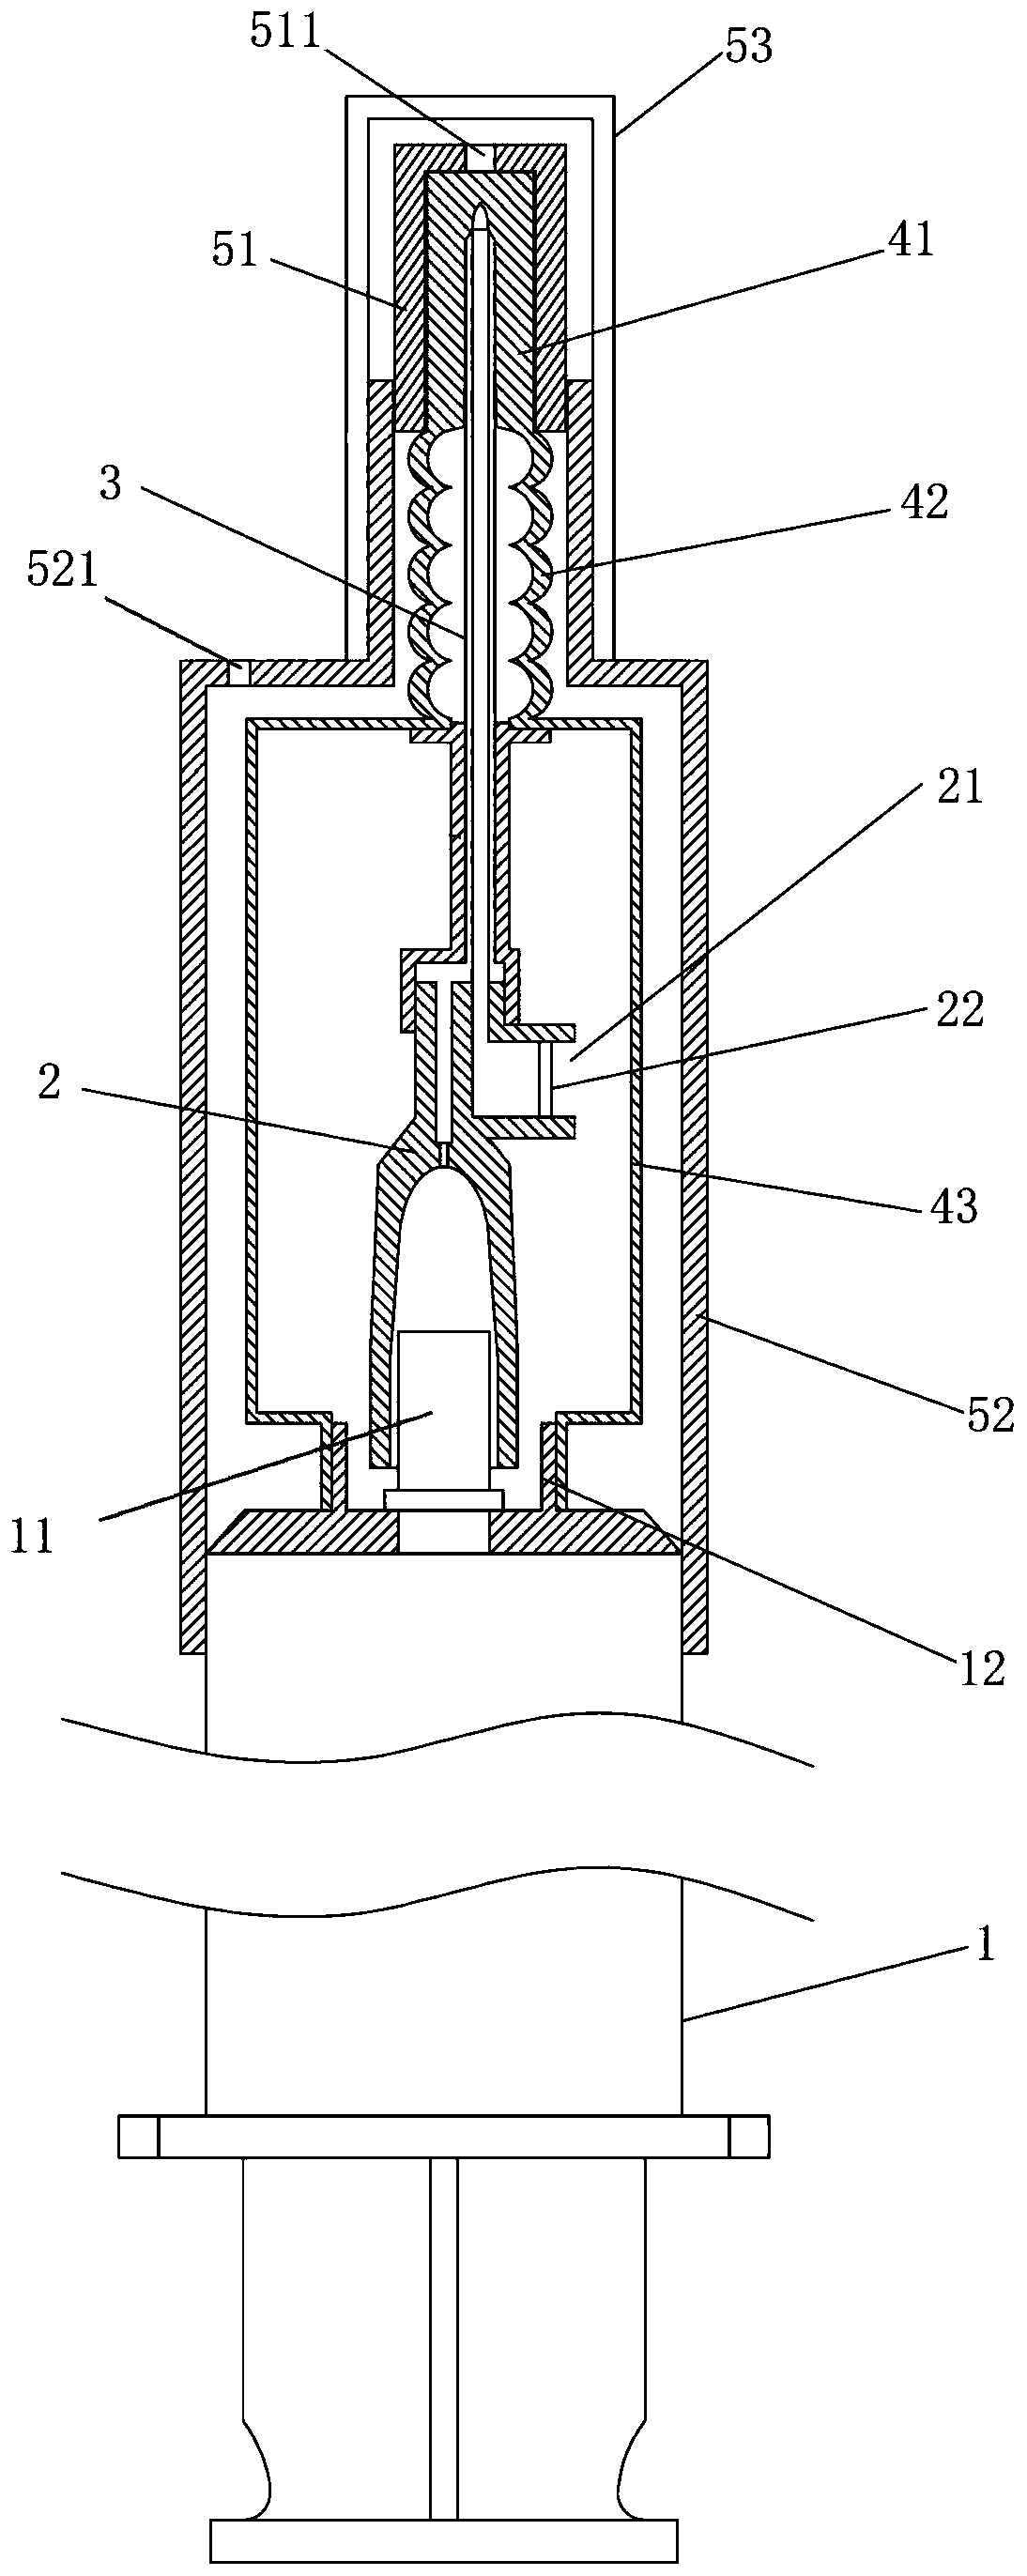 Closed transfer medicine dispensing device and application thereof in medicine dispensing and transfer